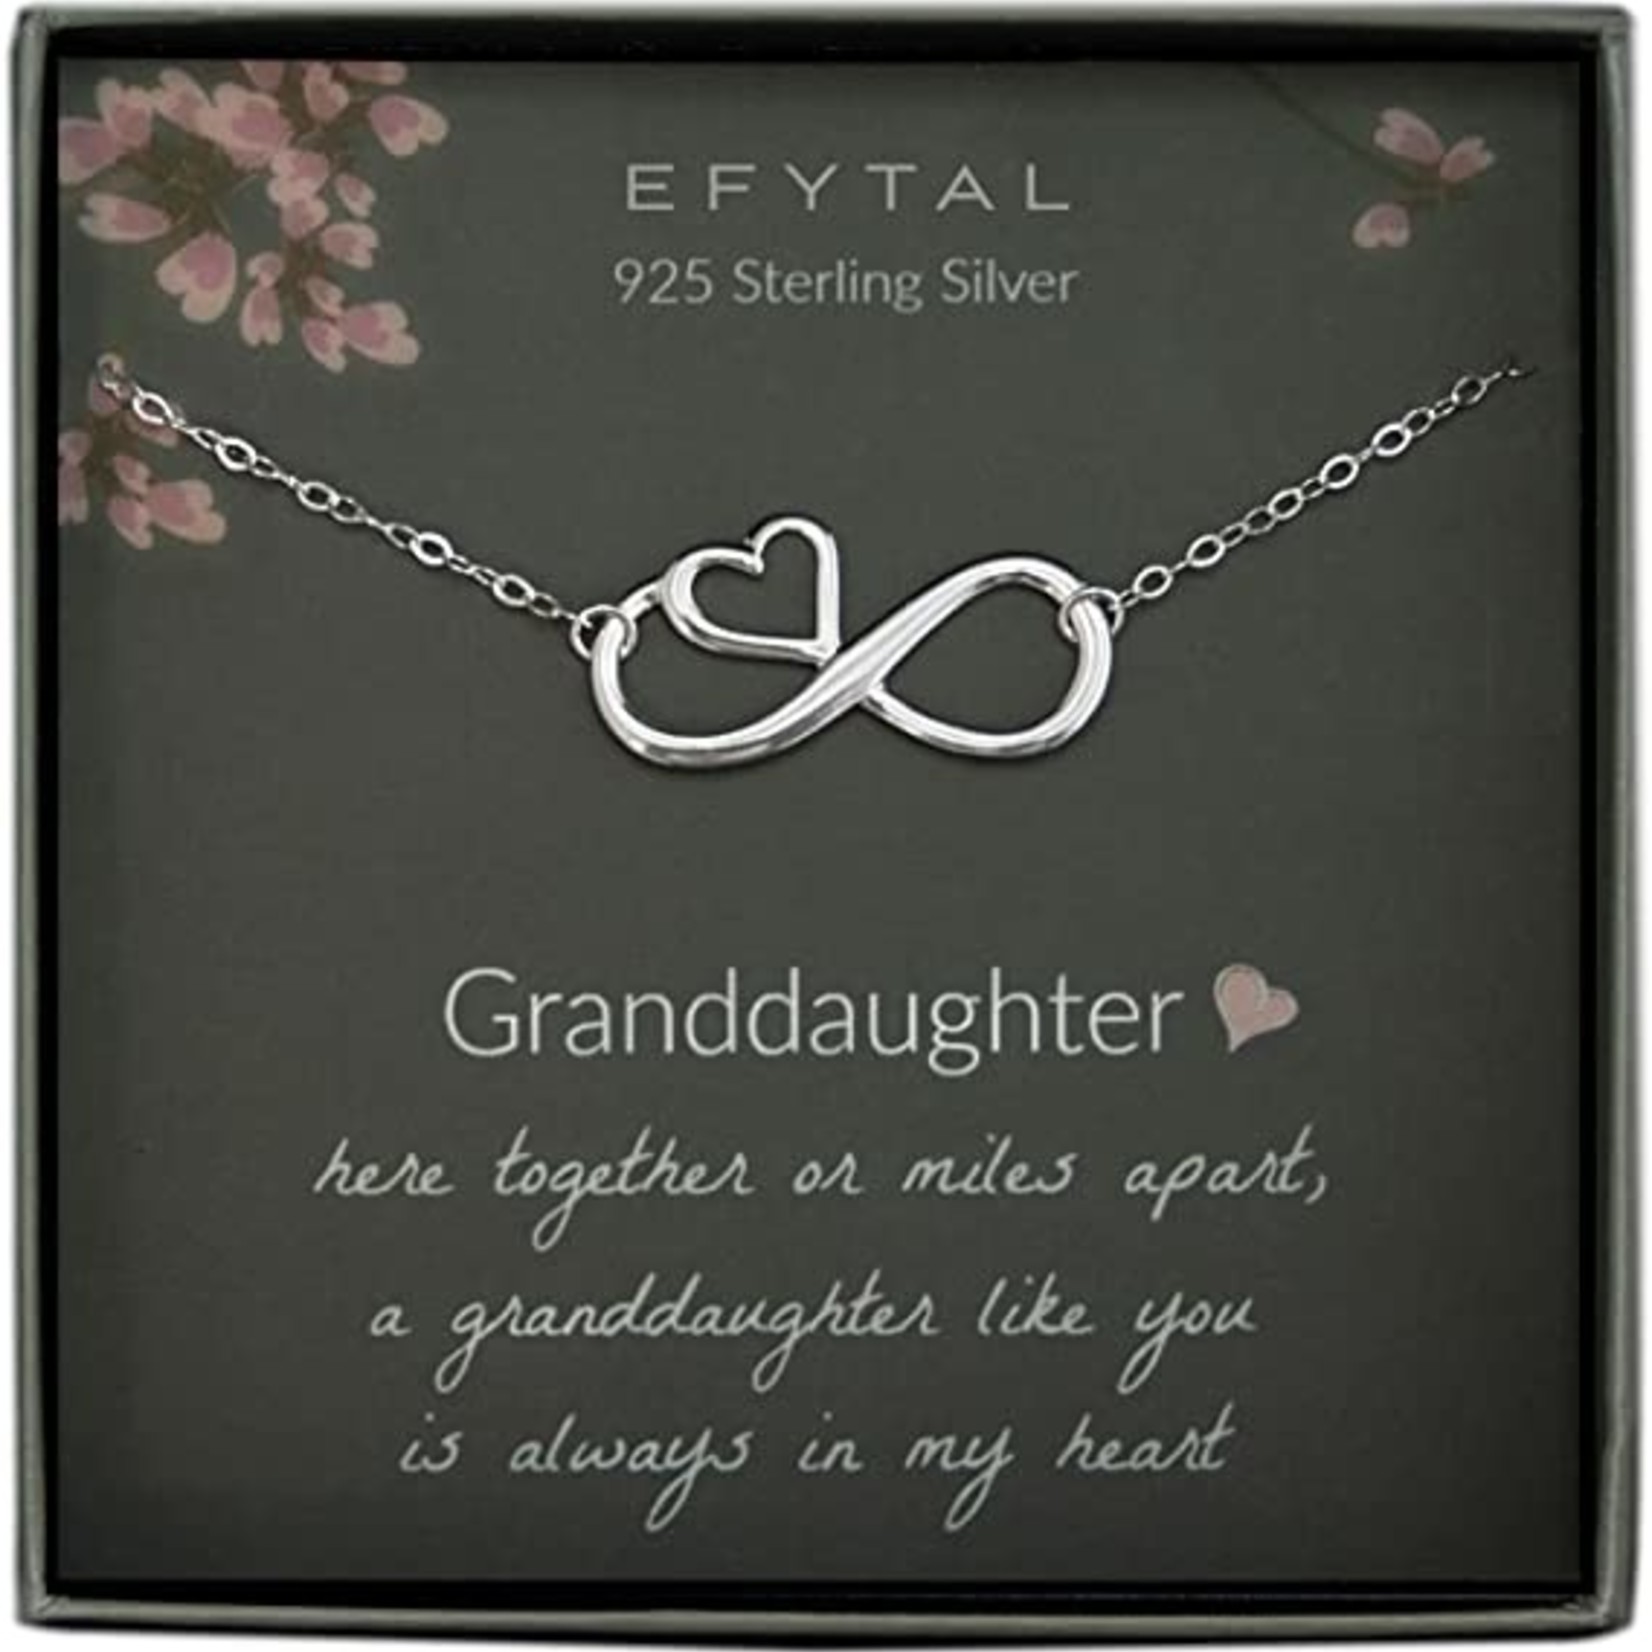 EFYTAL Jewelry Sterling Silver Infinity Necklace - Granddaughter